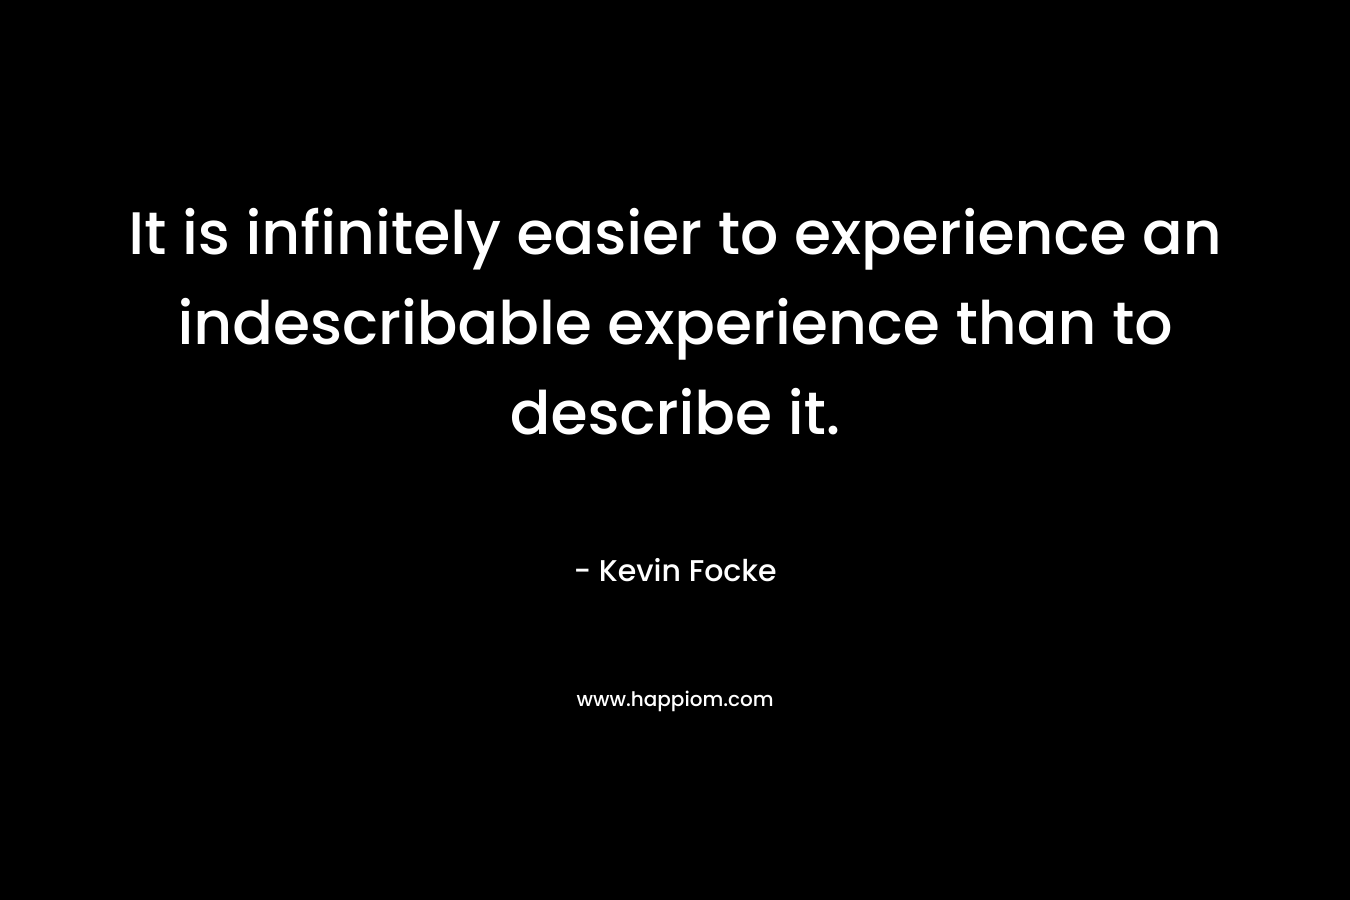 It is infinitely easier to experience an indescribable experience than to describe it. – Kevin Focke